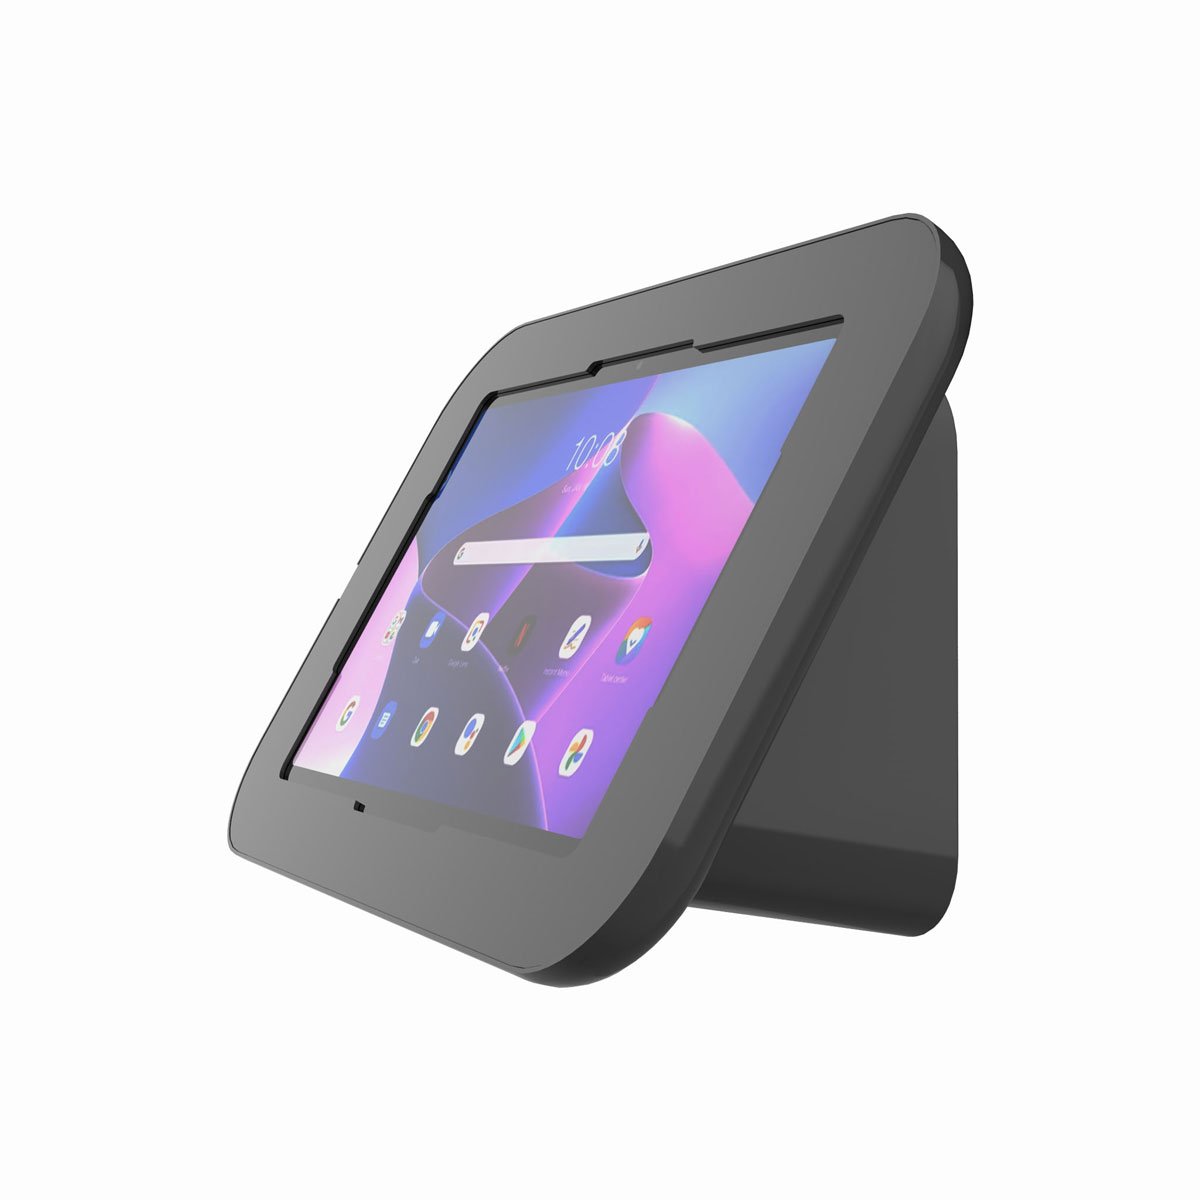 Buy Tablet & iPad counter or wall mounted stand Online